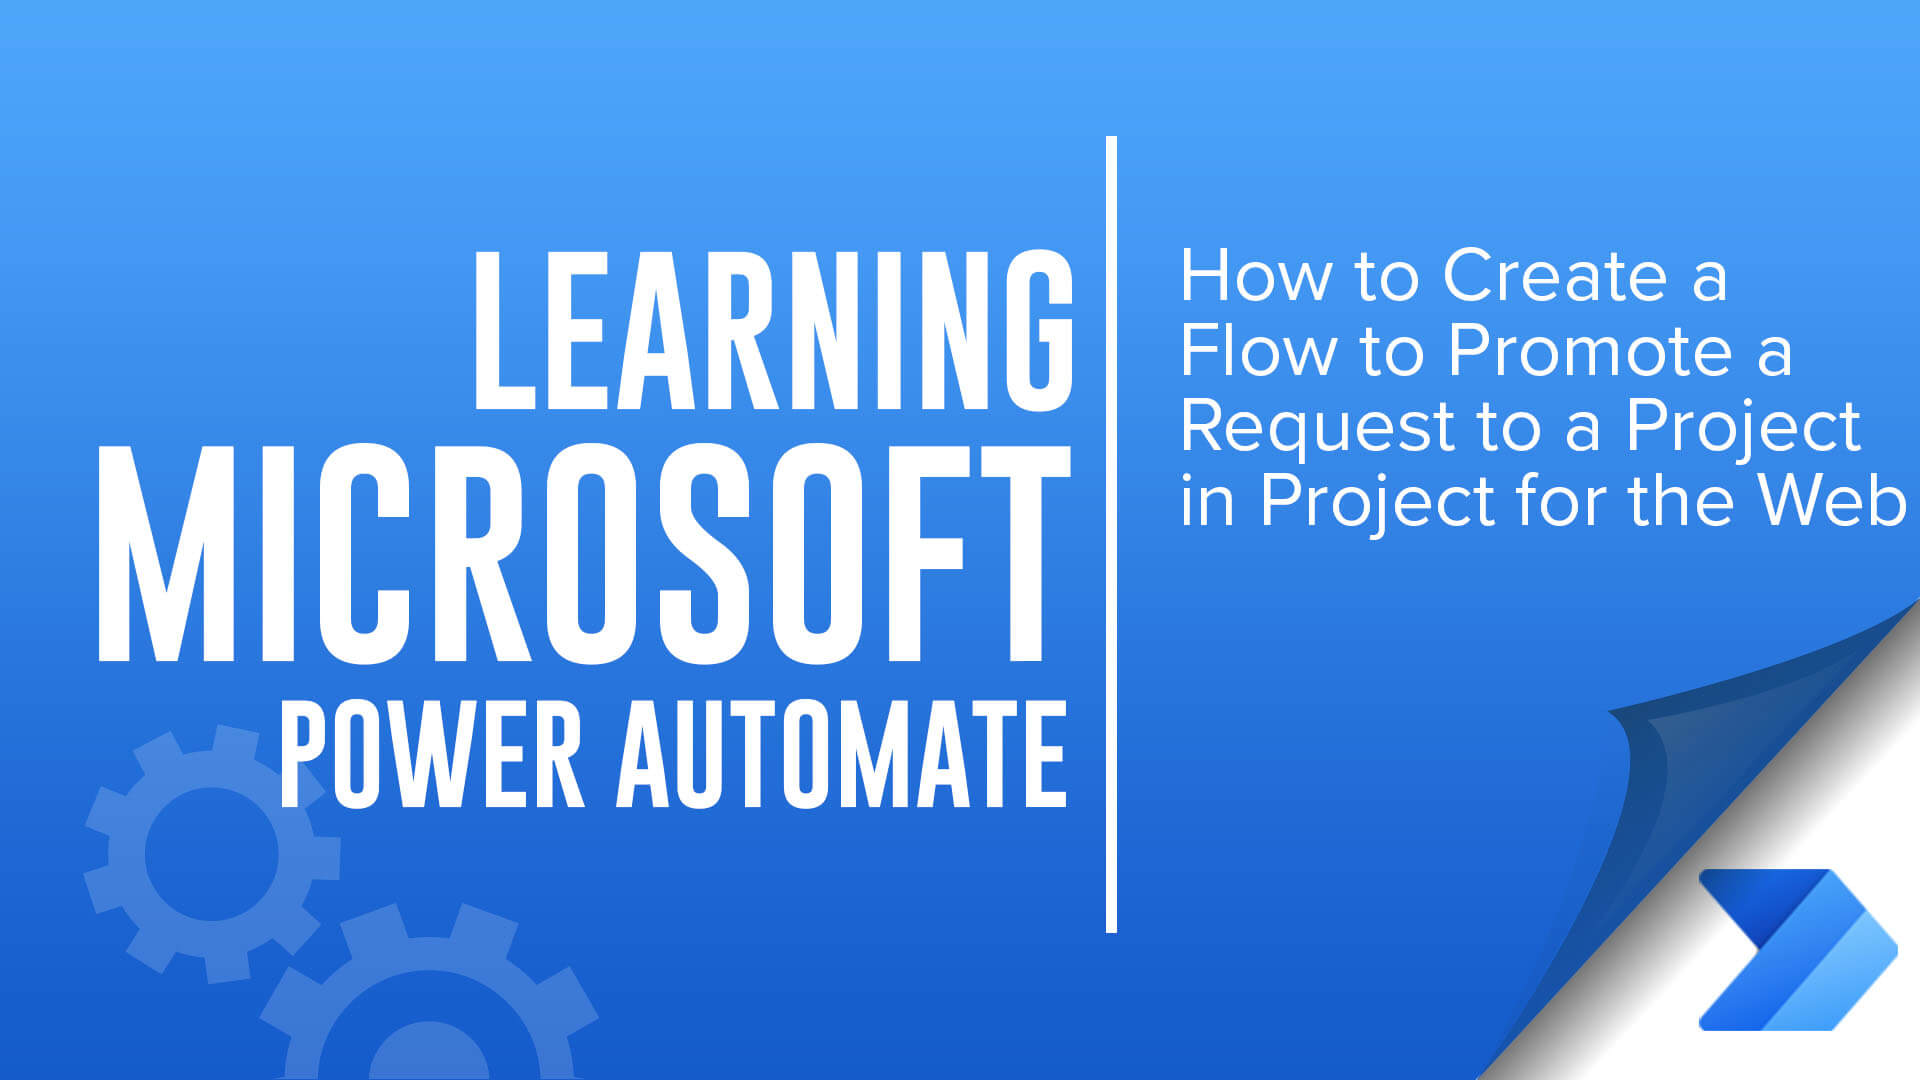 learning Power Automate - how to create a flow to promote a request to a project in project for the web